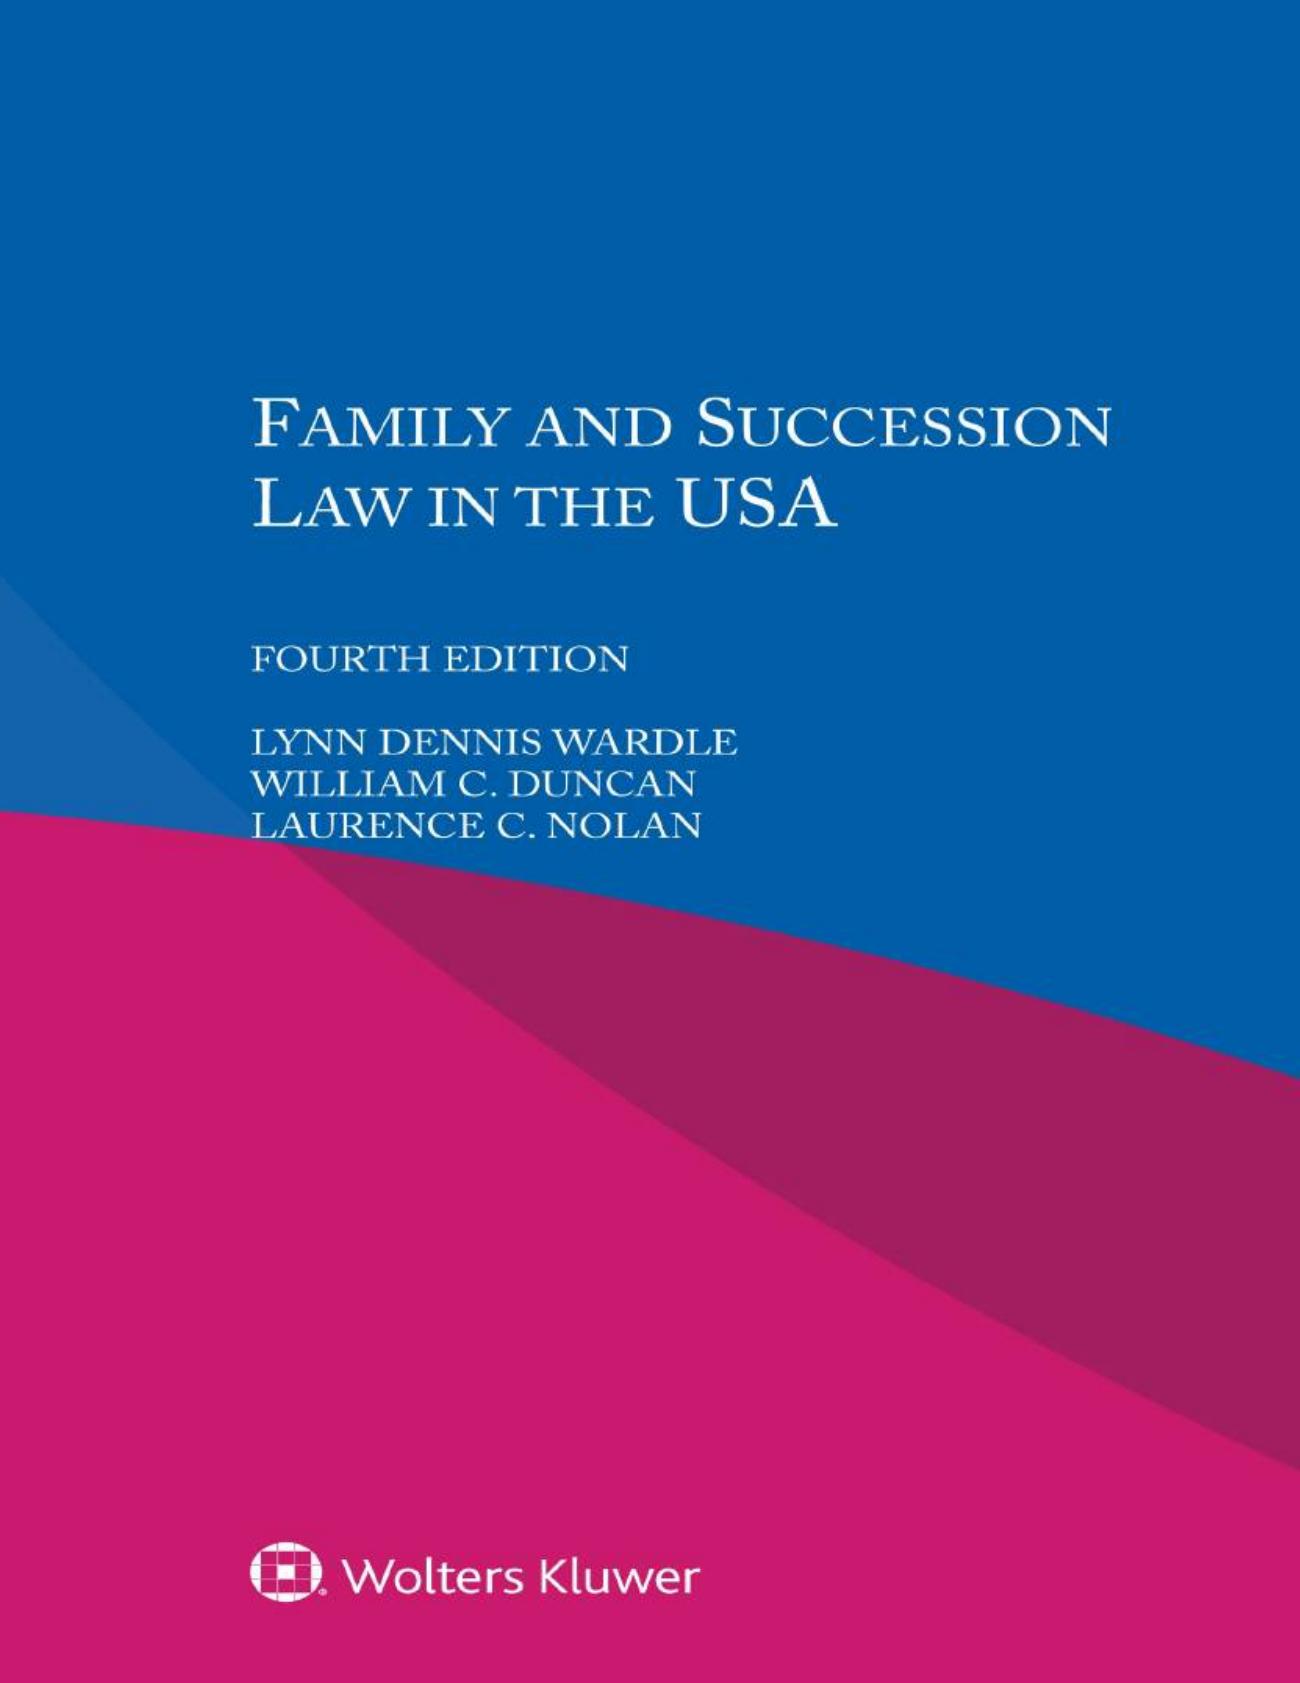 Family and Succession Law in the USA 4th Edición by Lynn Dennis Wardle; William C. Duncan; Laurence C. Nolan